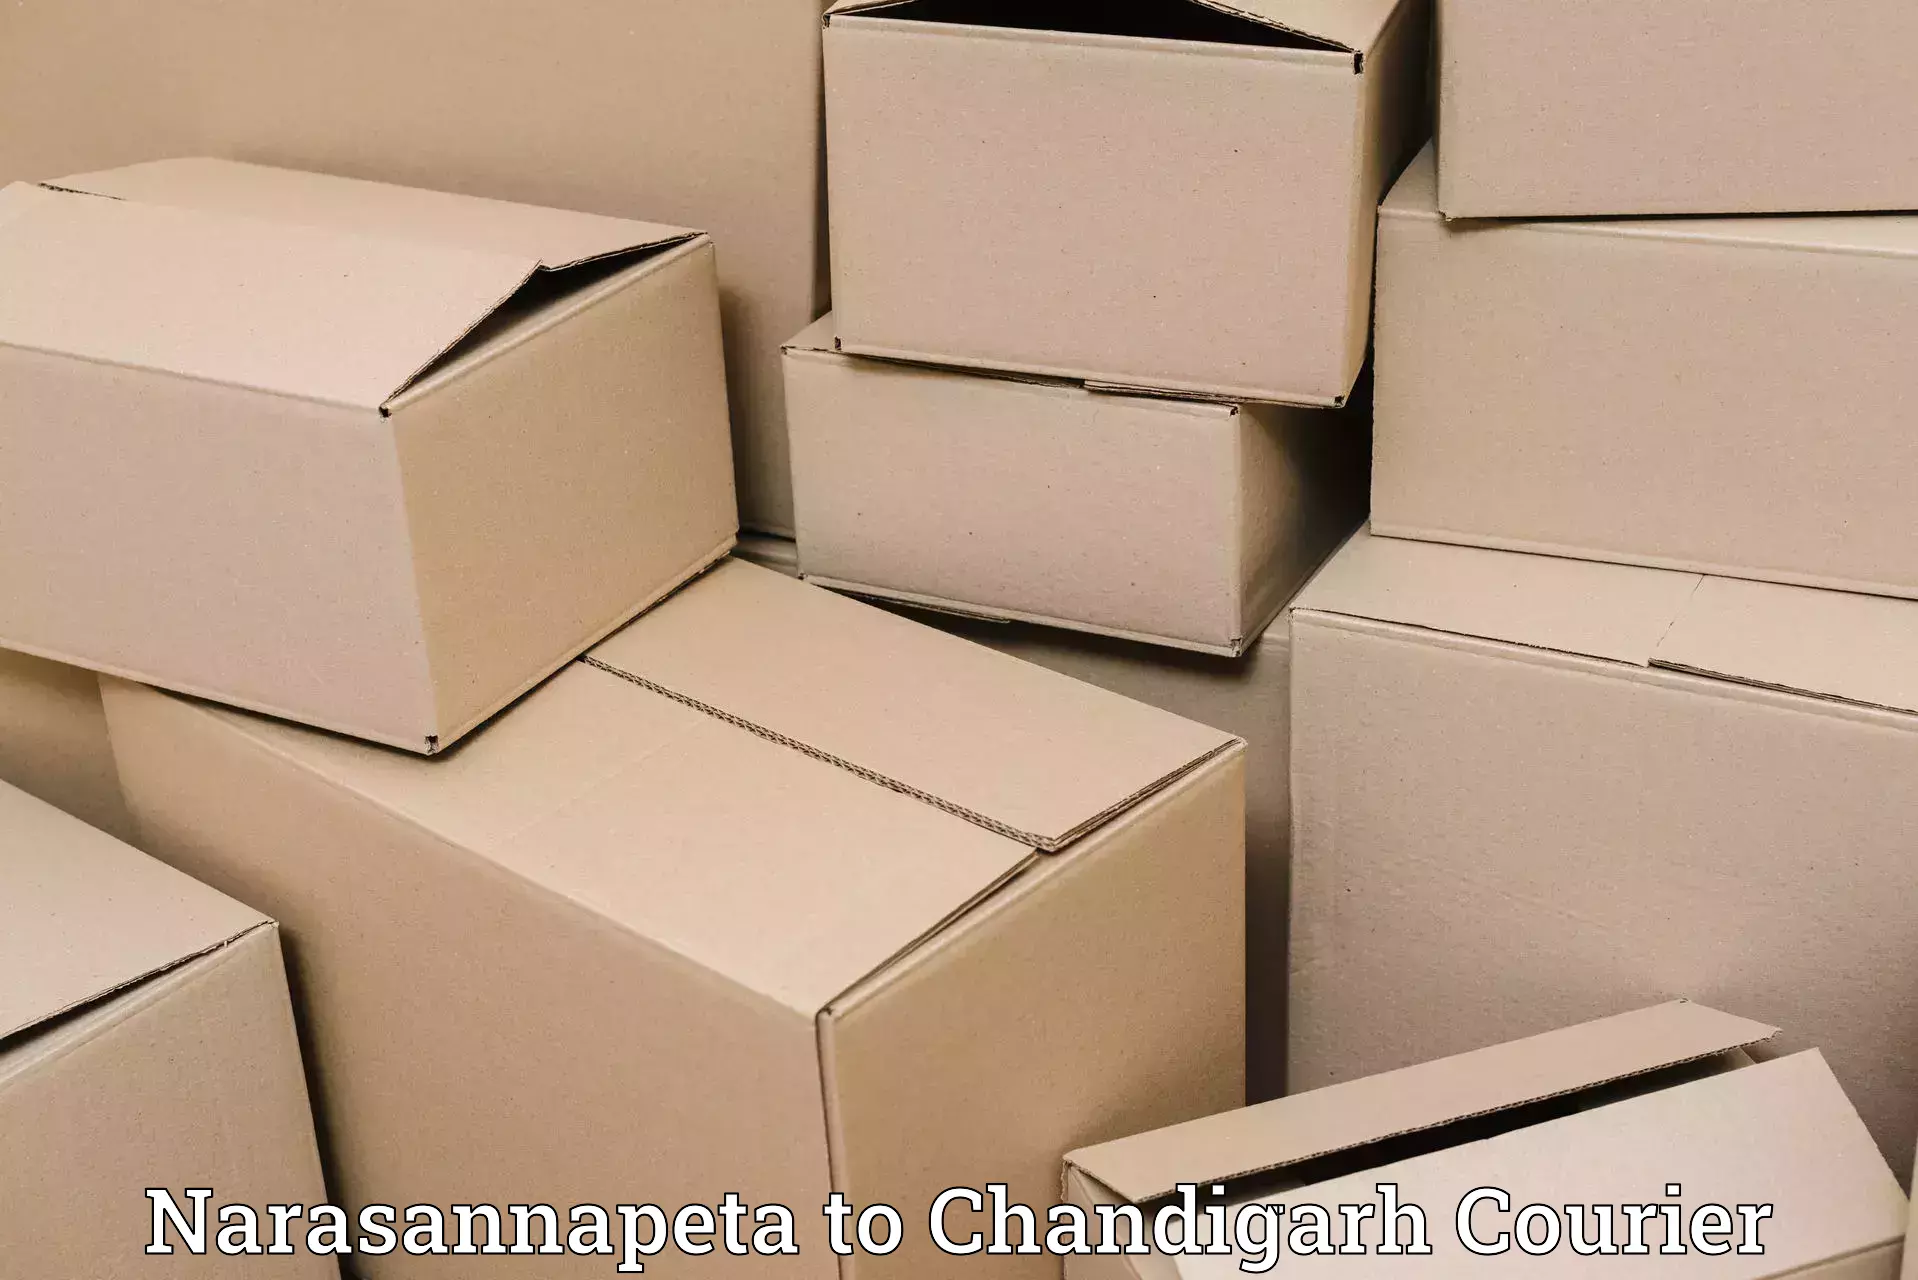 Tailored delivery services Narasannapeta to Chandigarh